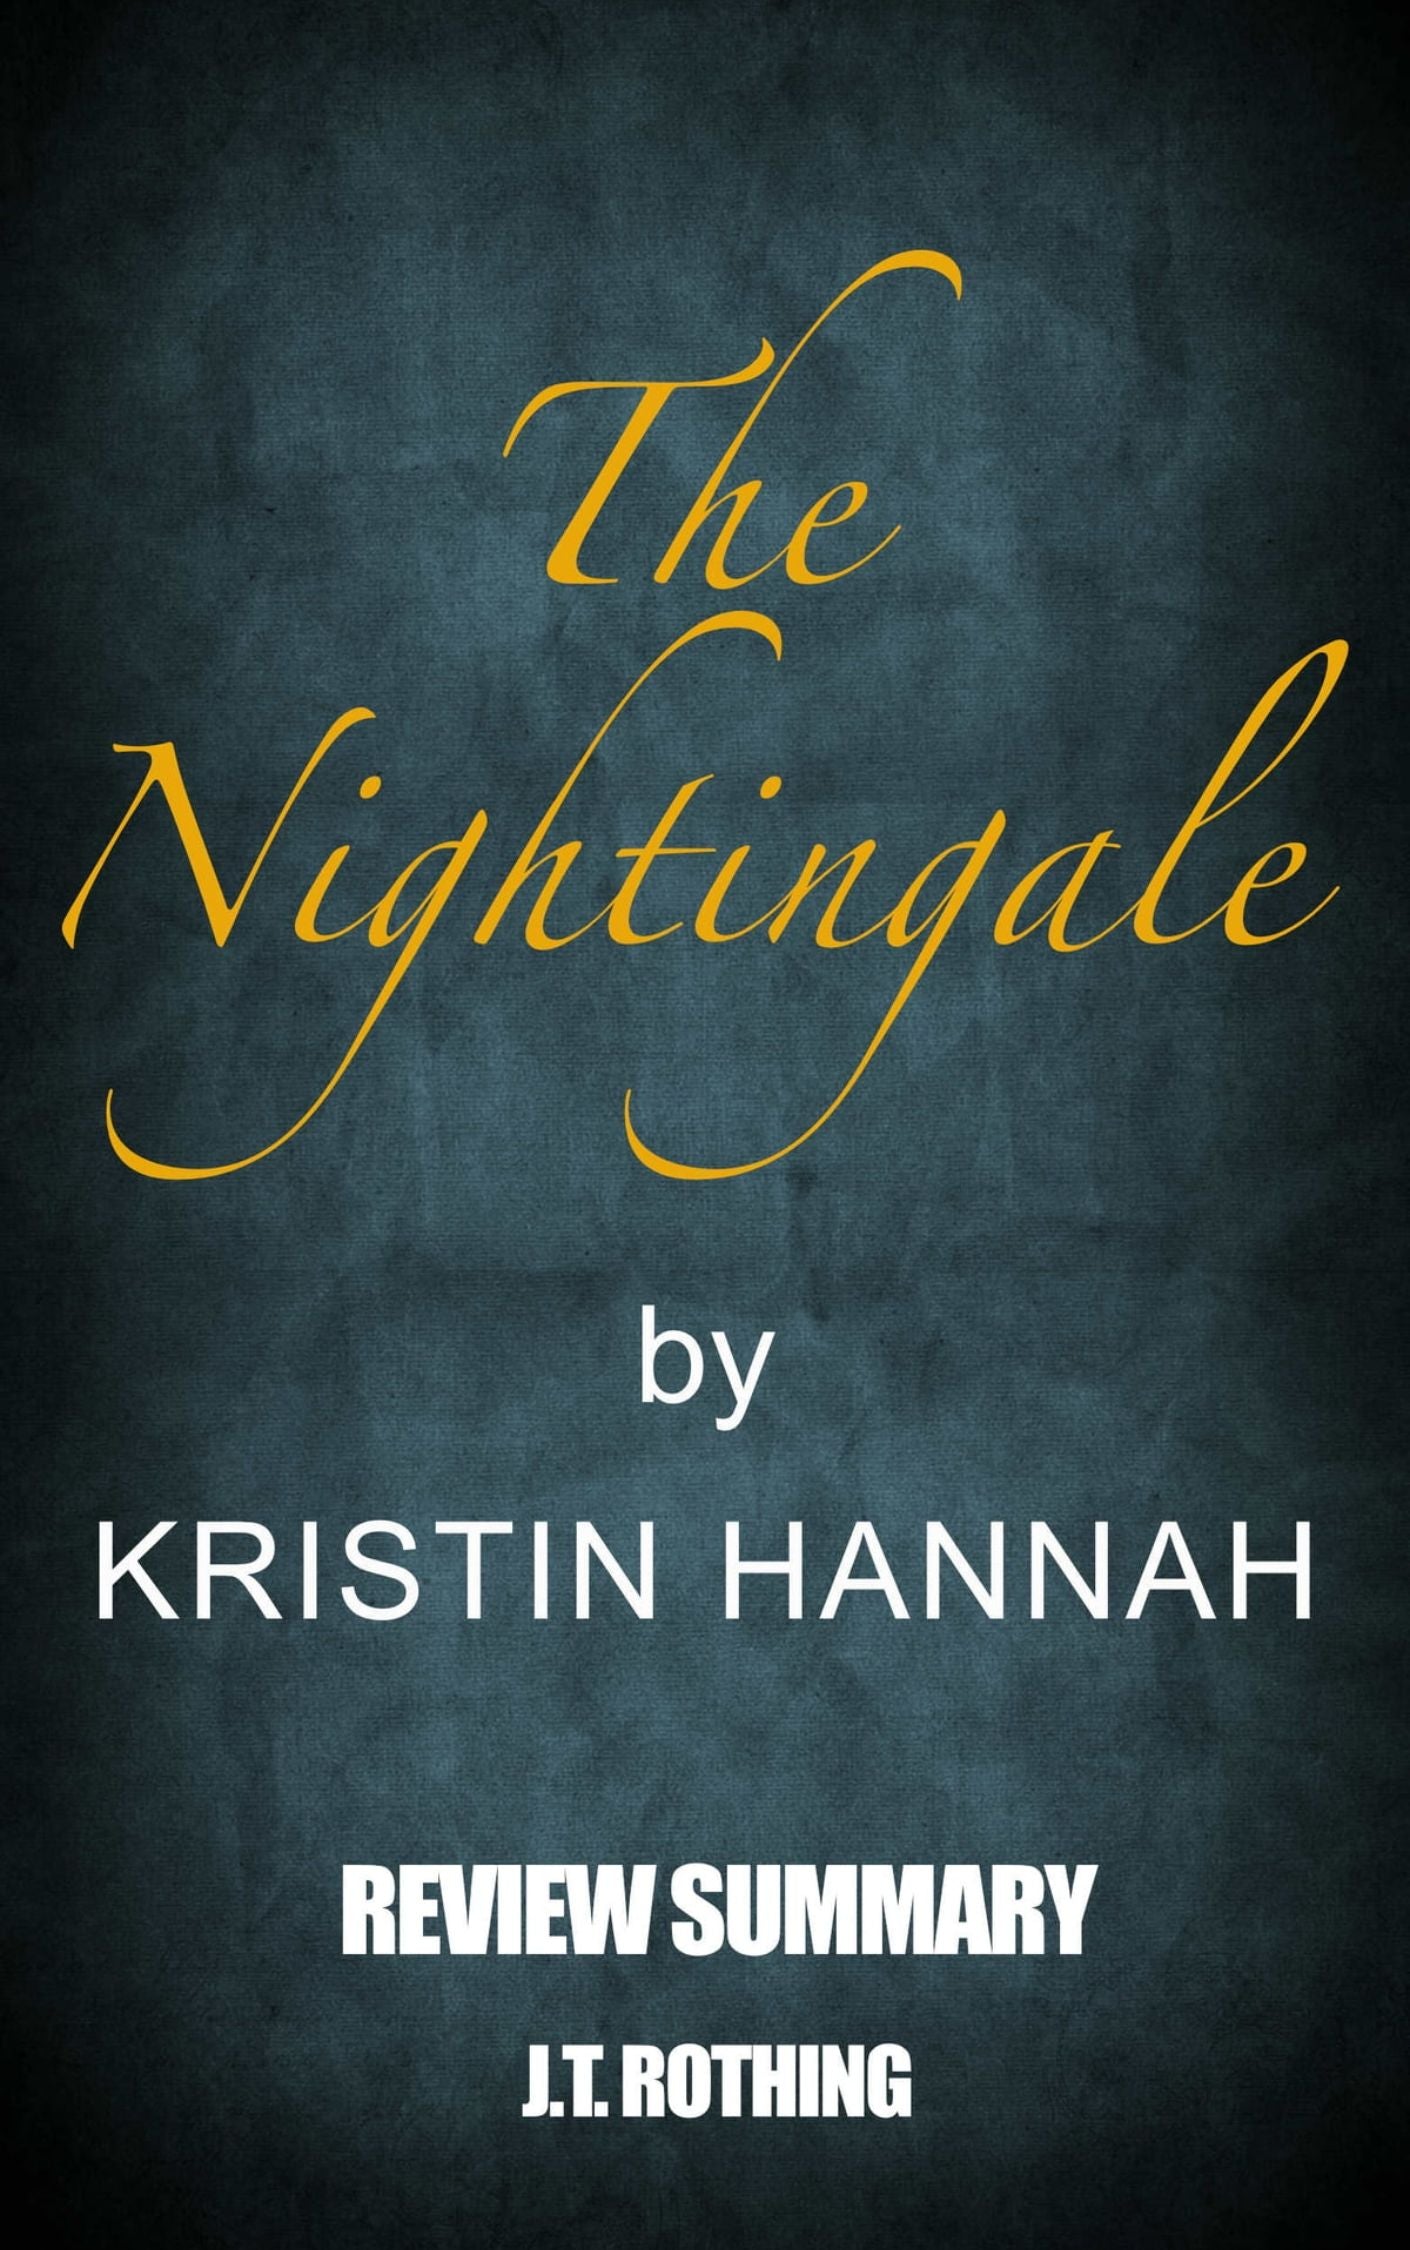 The Nightingale" by Kristin Hannah: Best Books for Women